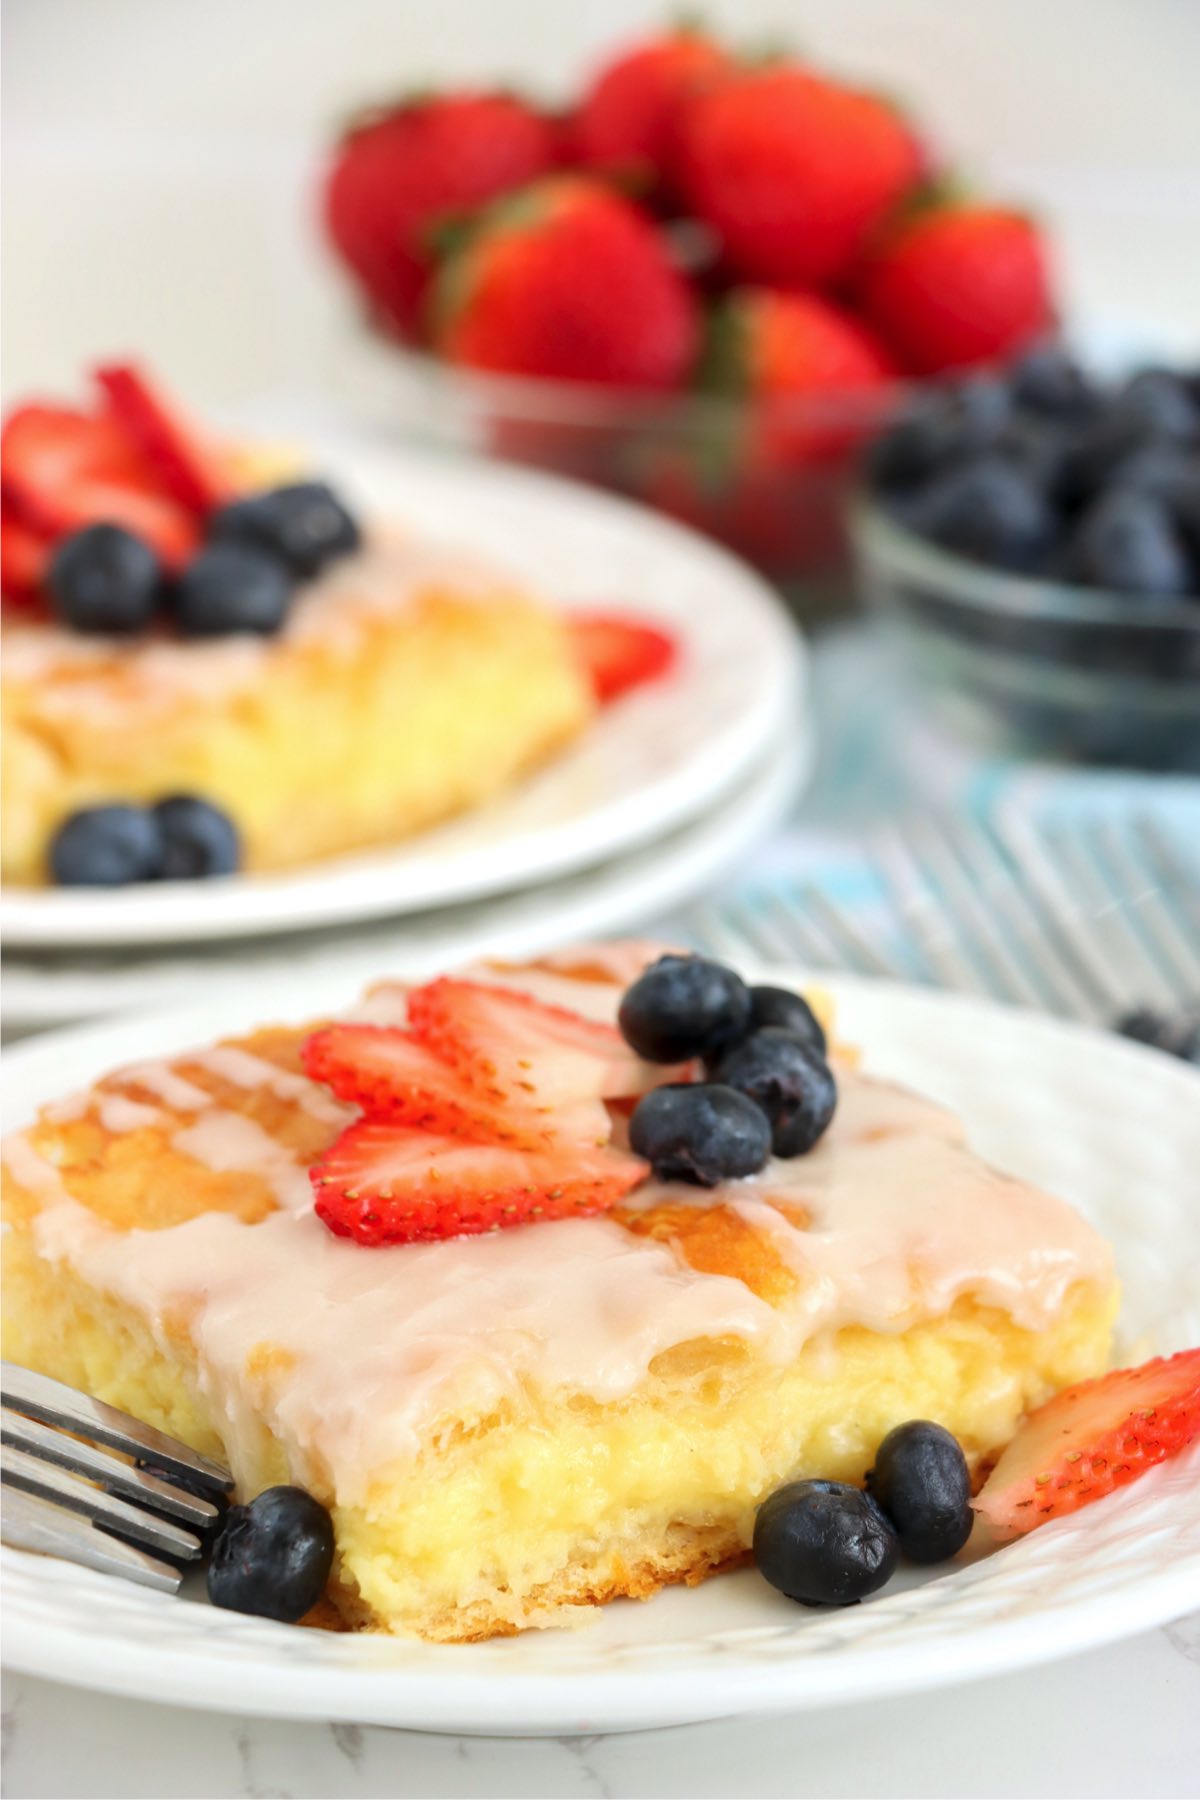 cheese danish topped with fruit